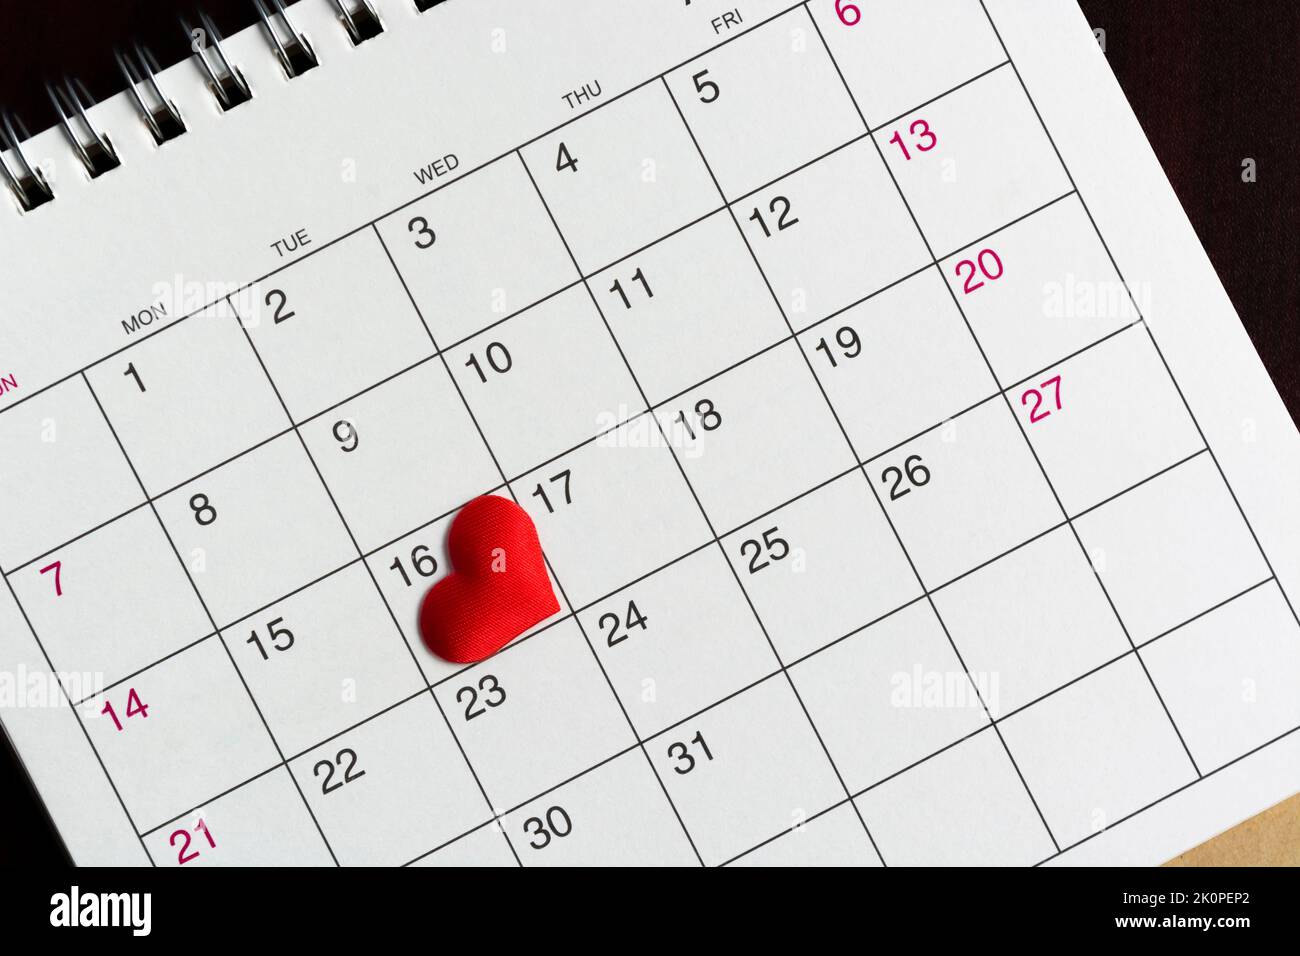 Red heart shape on the date of the 16th day in the calendar. Stock Photo